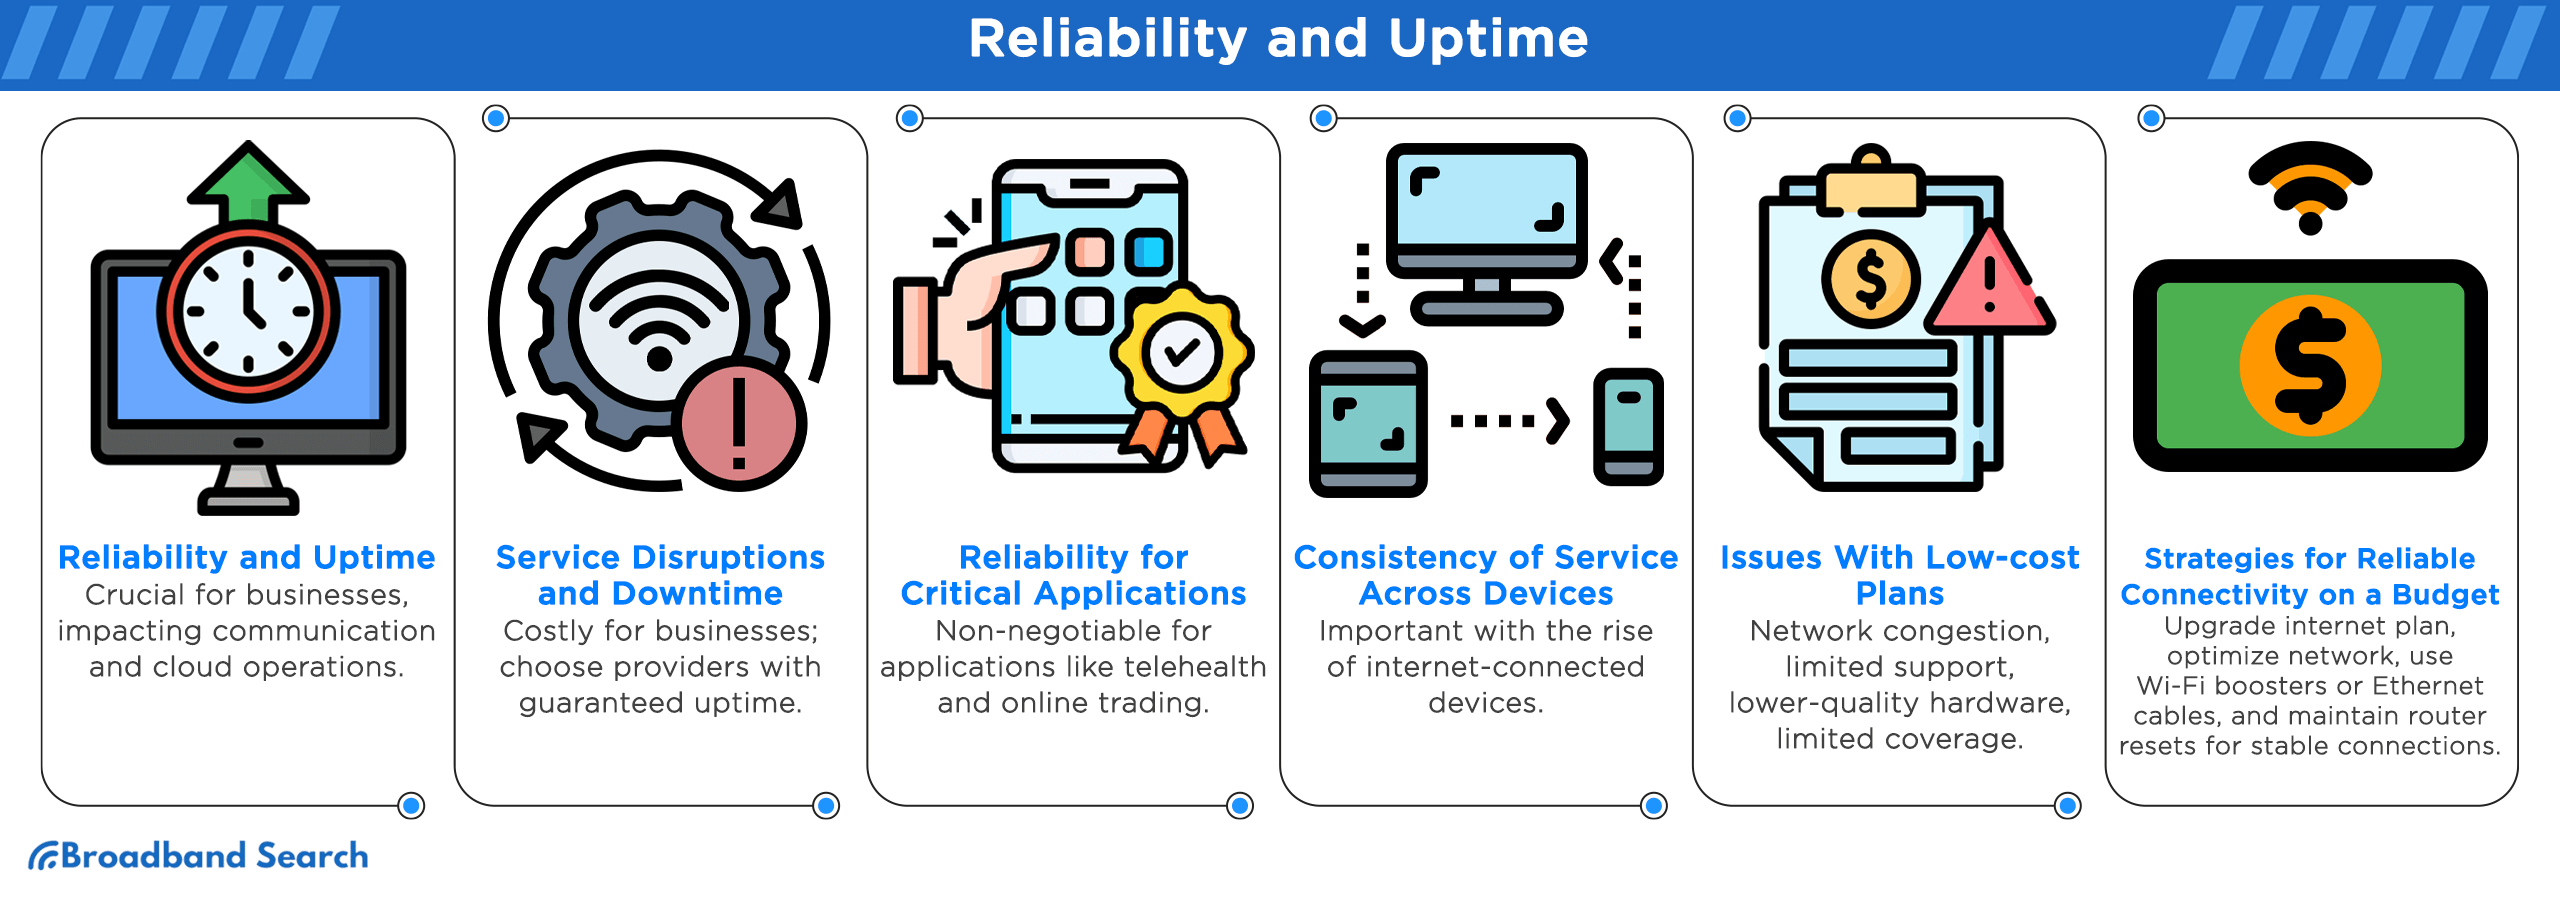 Reliability and uptime